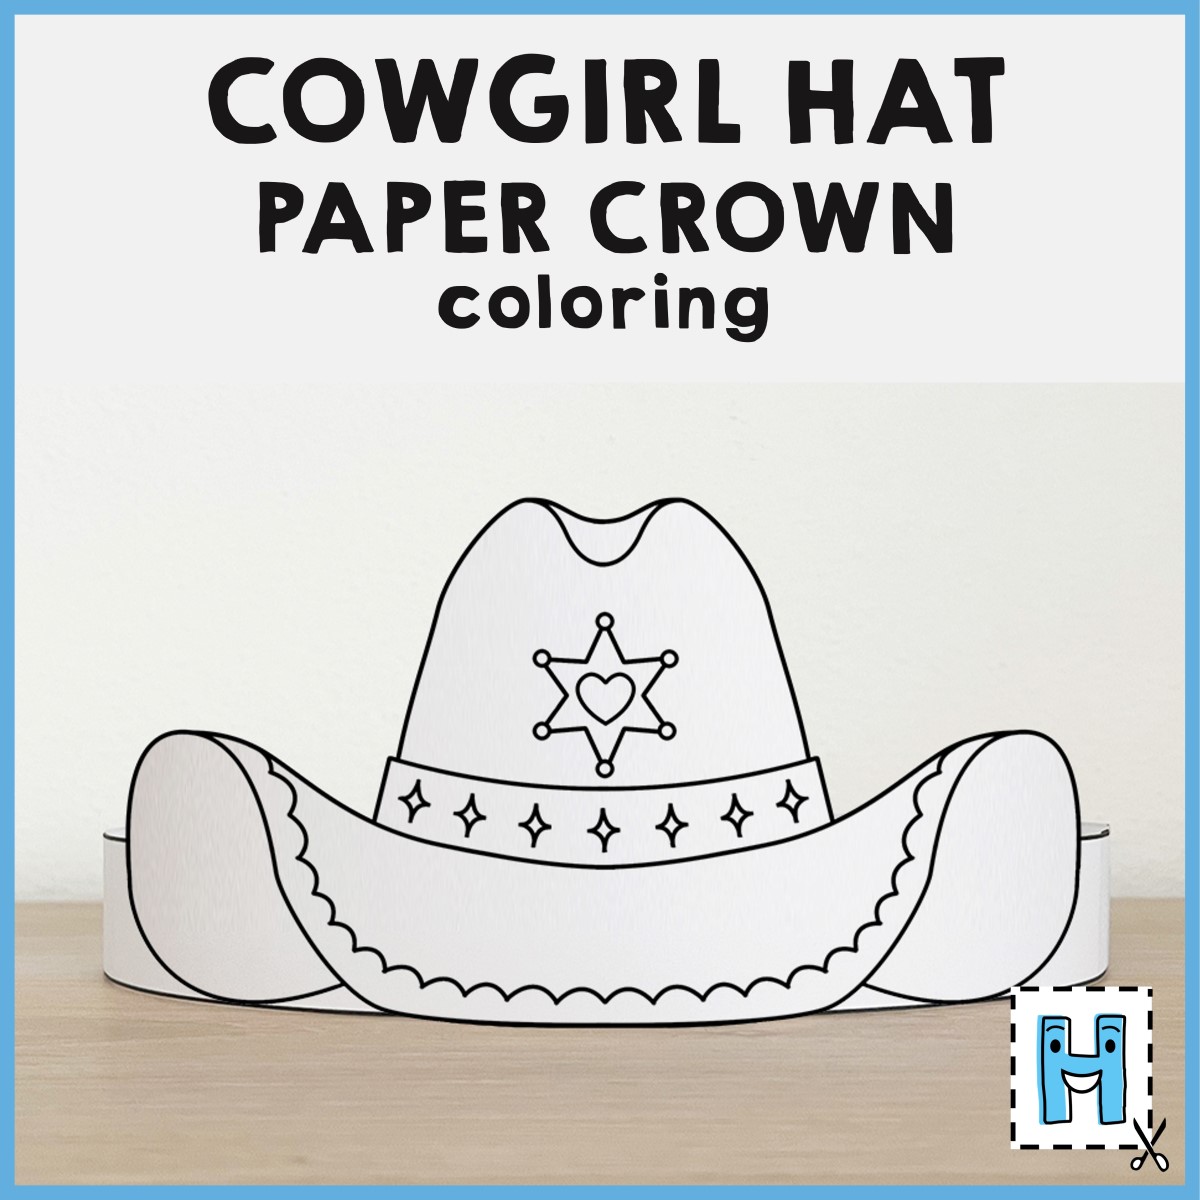 Cowgirl hat paper crown printable wild west coloring craft activity for kids made by teachers